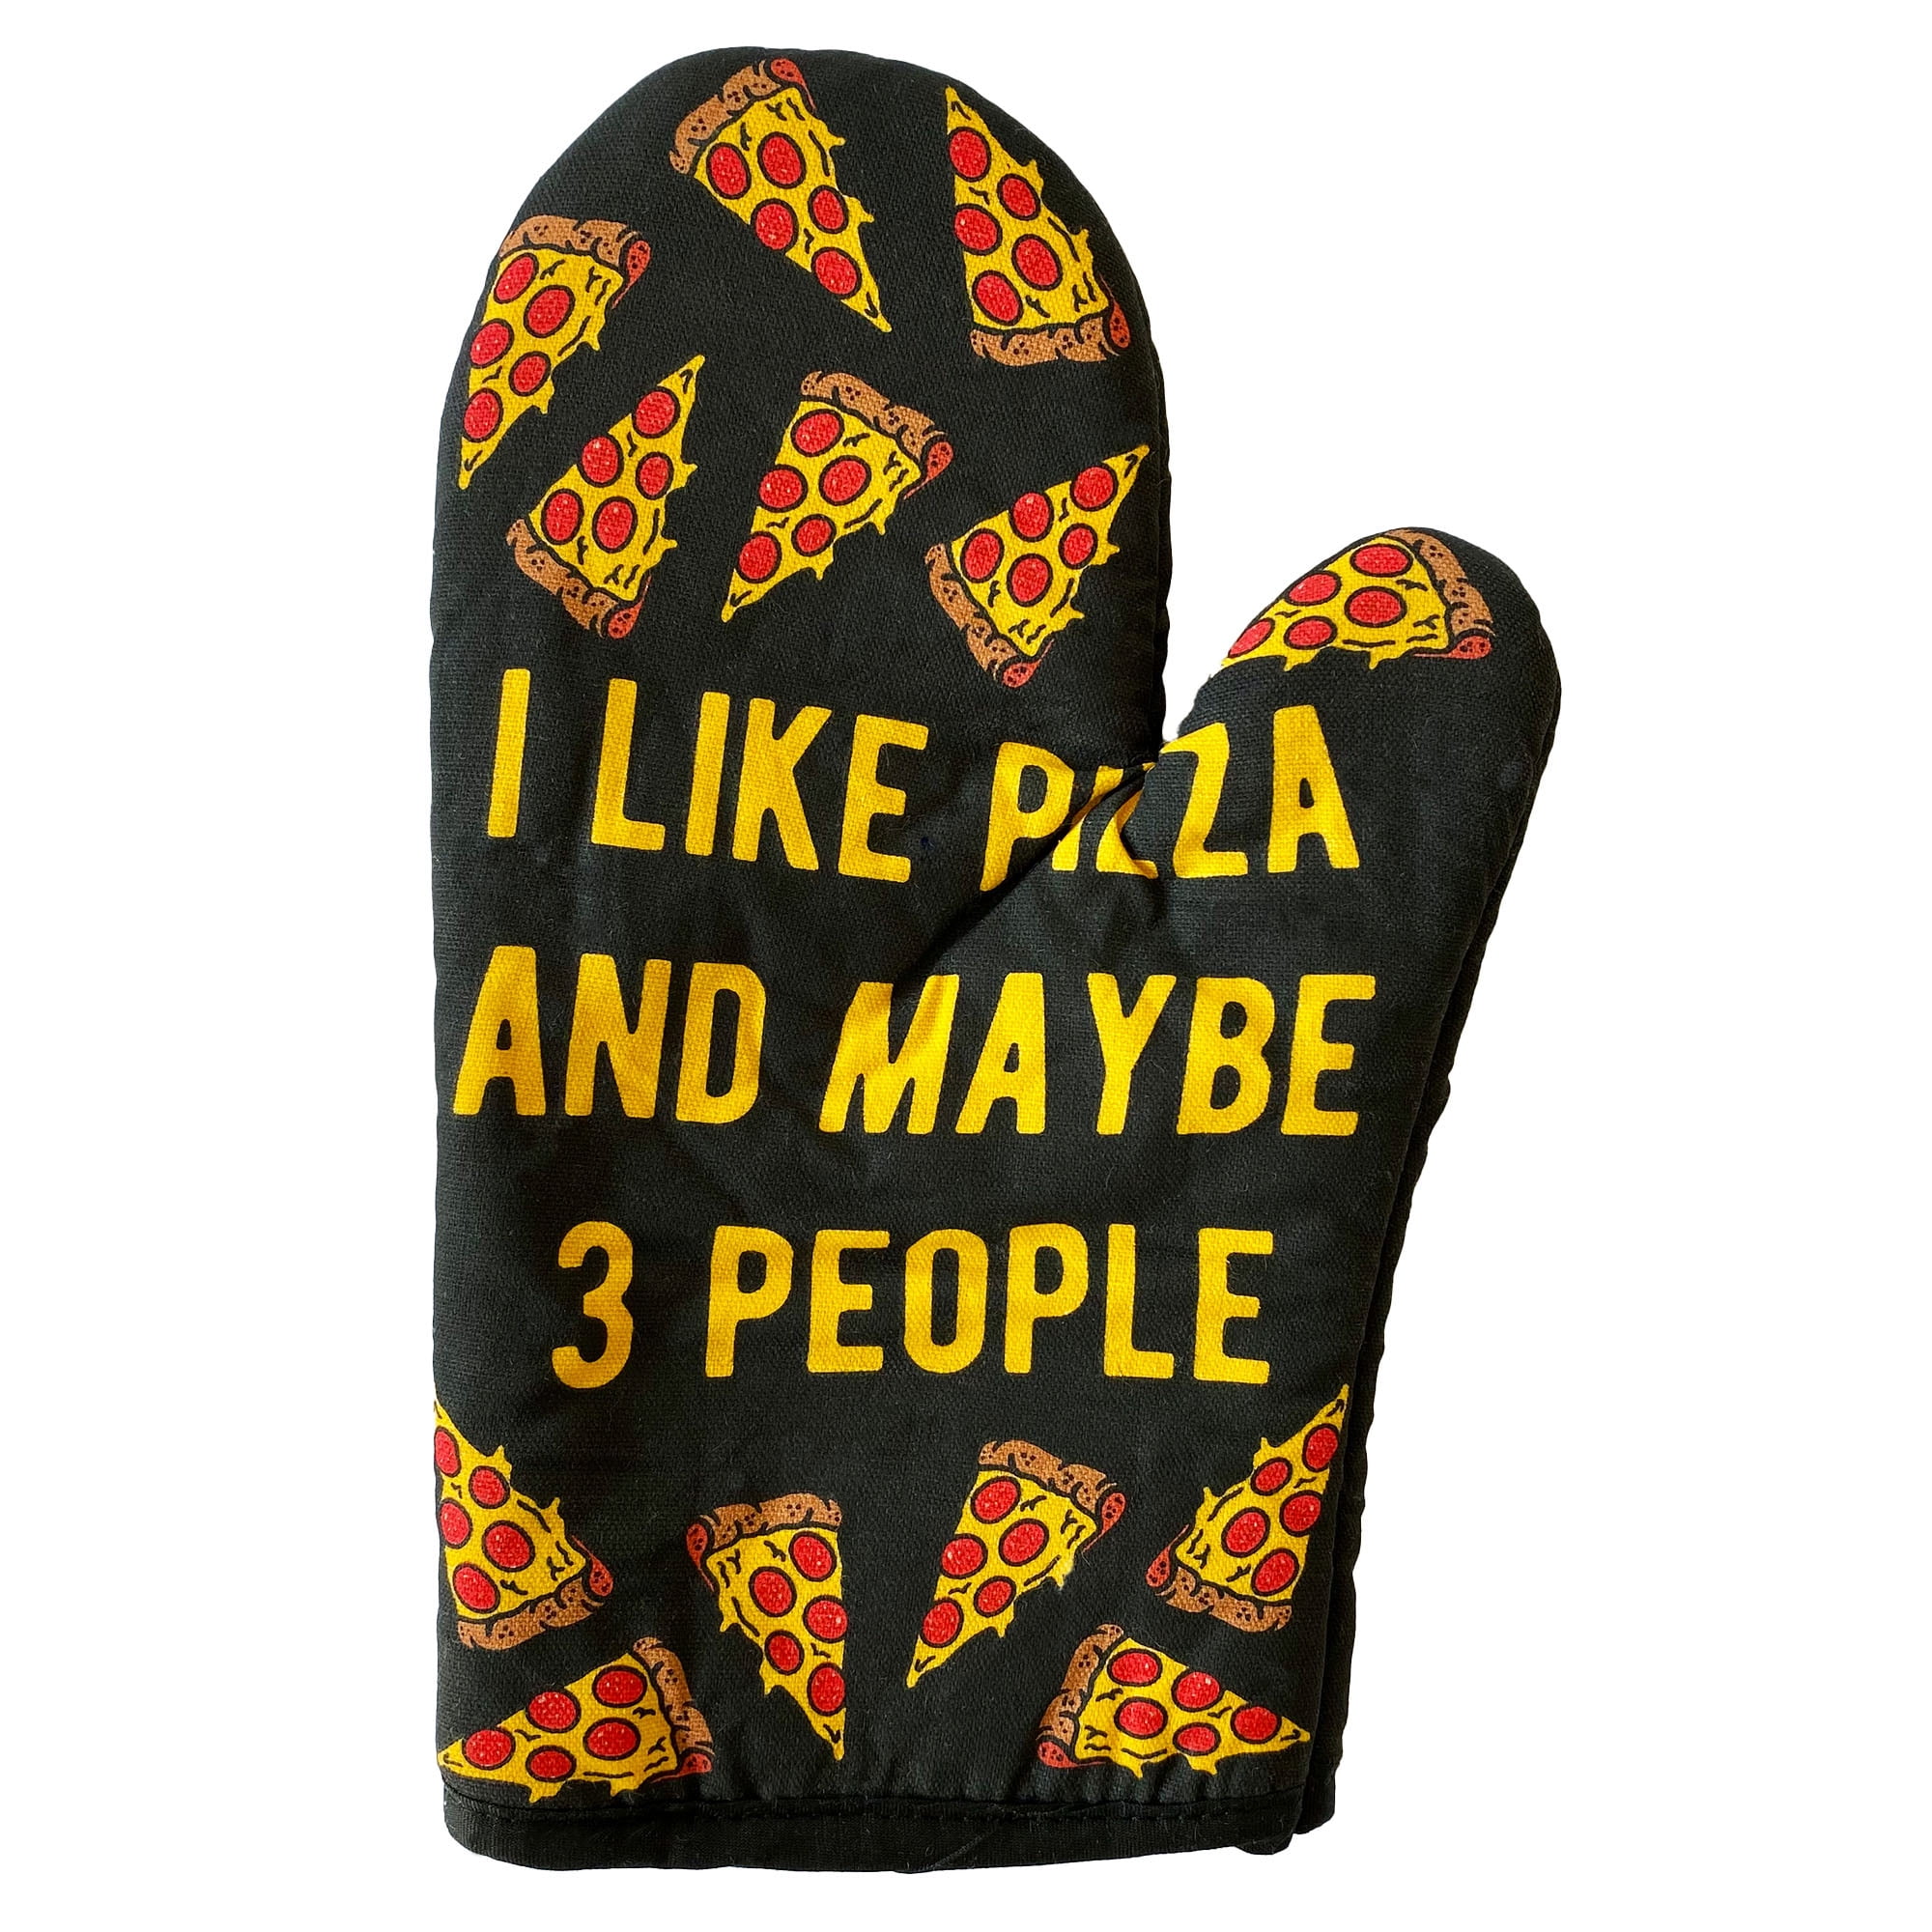 Mens Tattoo Hand Oven Mitt Funny Cook Tats Ink Graphic Novelty Kitchen  Accessories Funny Graphic Kitchenwear for Foodies with Adult Humor Black  Oven